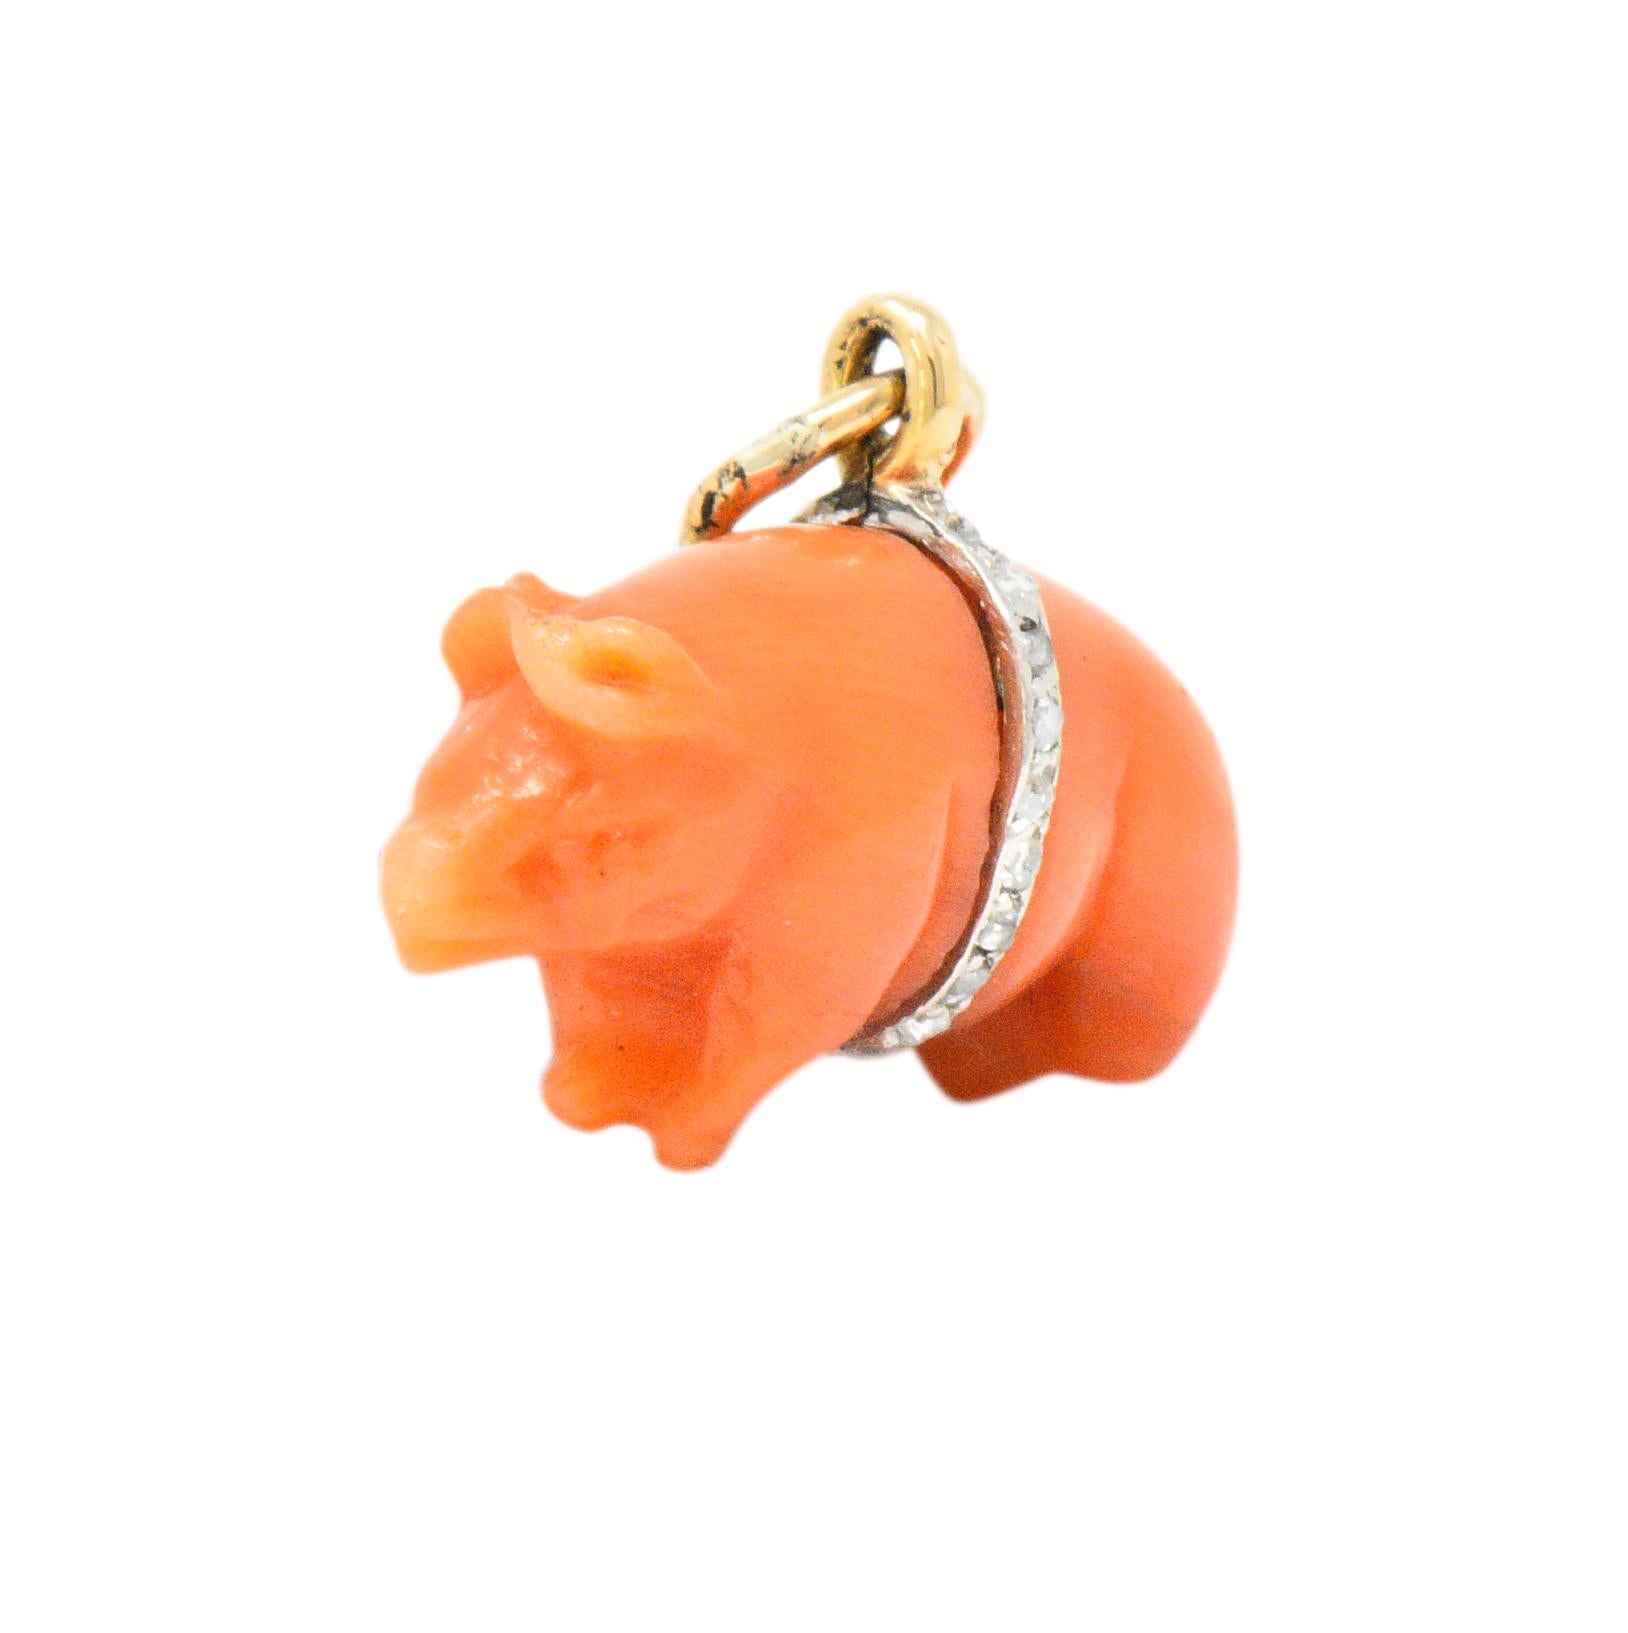 Charm is comprised of bright pinkish-orange coral

Intricately carved to depict a pig

Bisected by a gold band around its stomach, set fully around by rose cut diamonds (two missing)

Tested as 18 karat gold

Circa: 1905

Measures 12.0 mm x 10.0